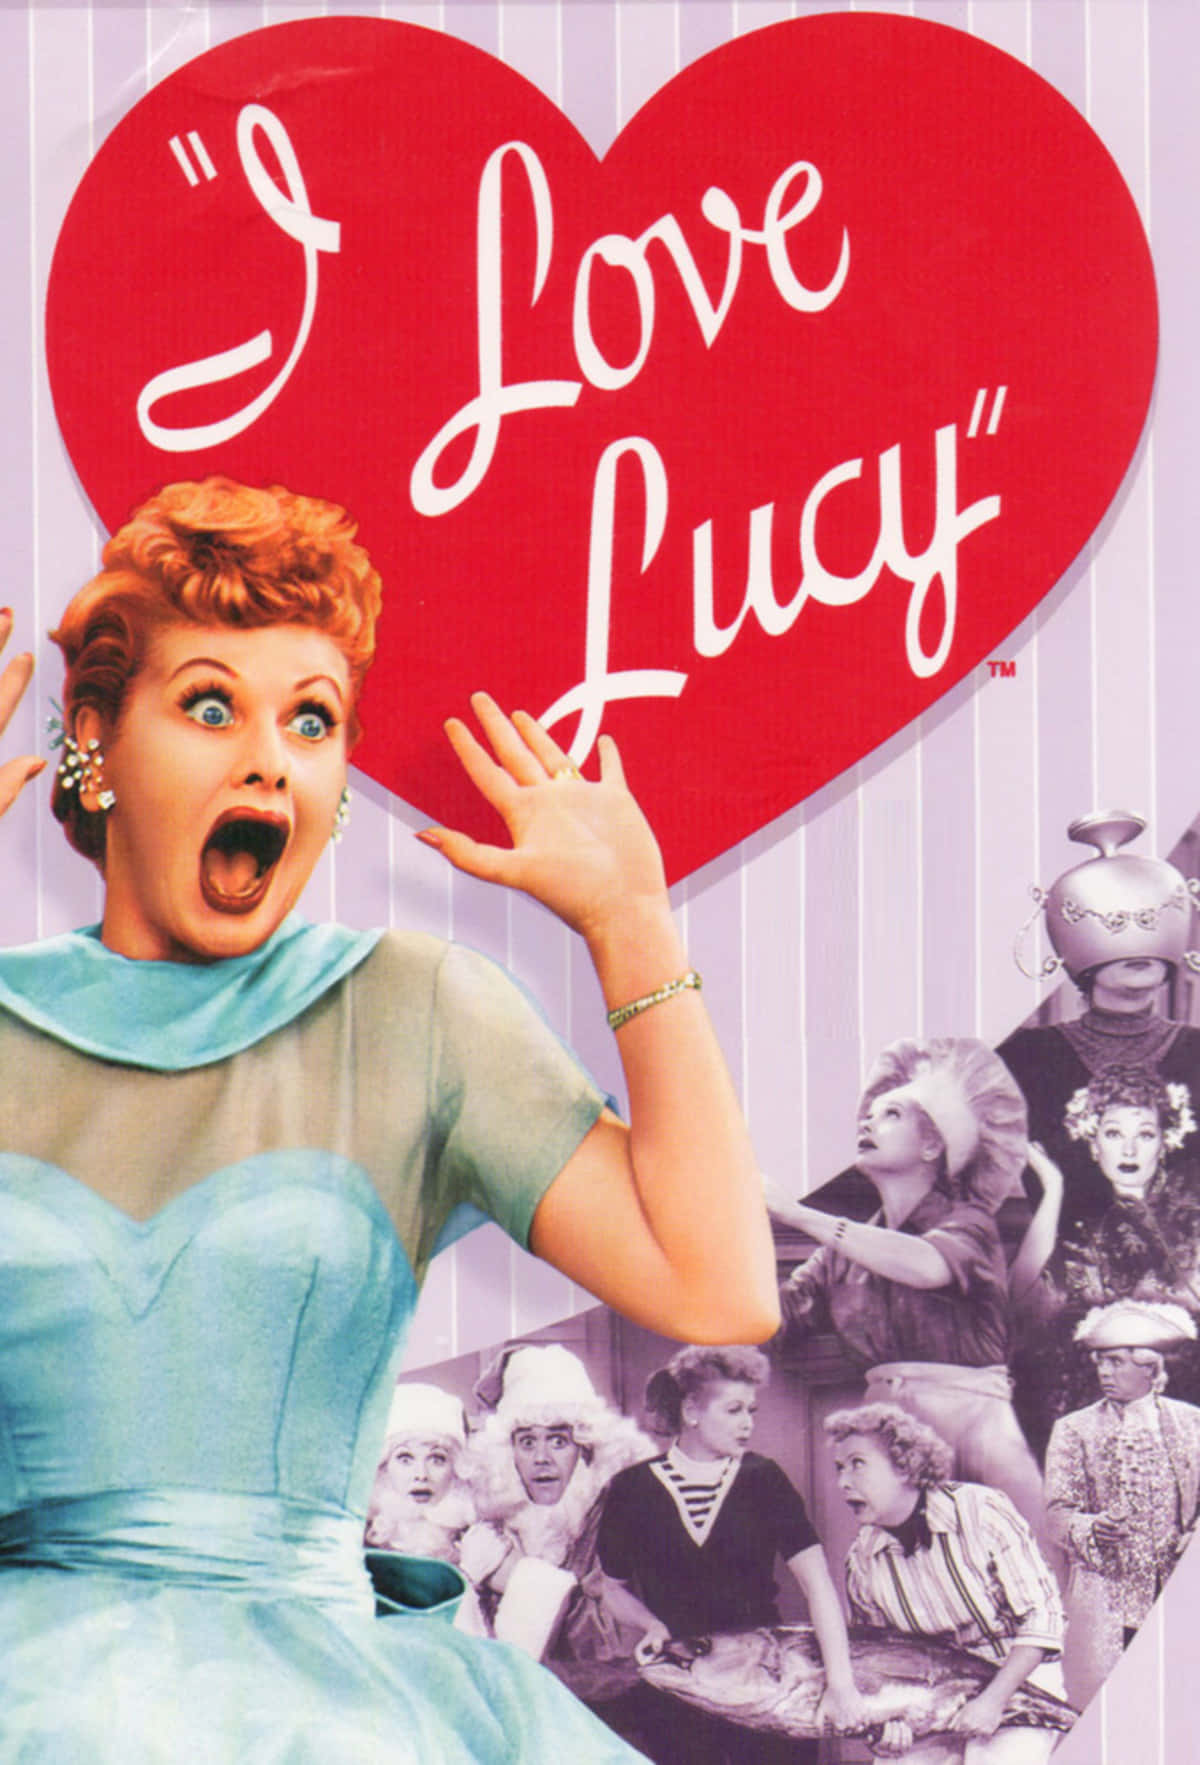 I Love Lucy Dvd Cover Wallpaper